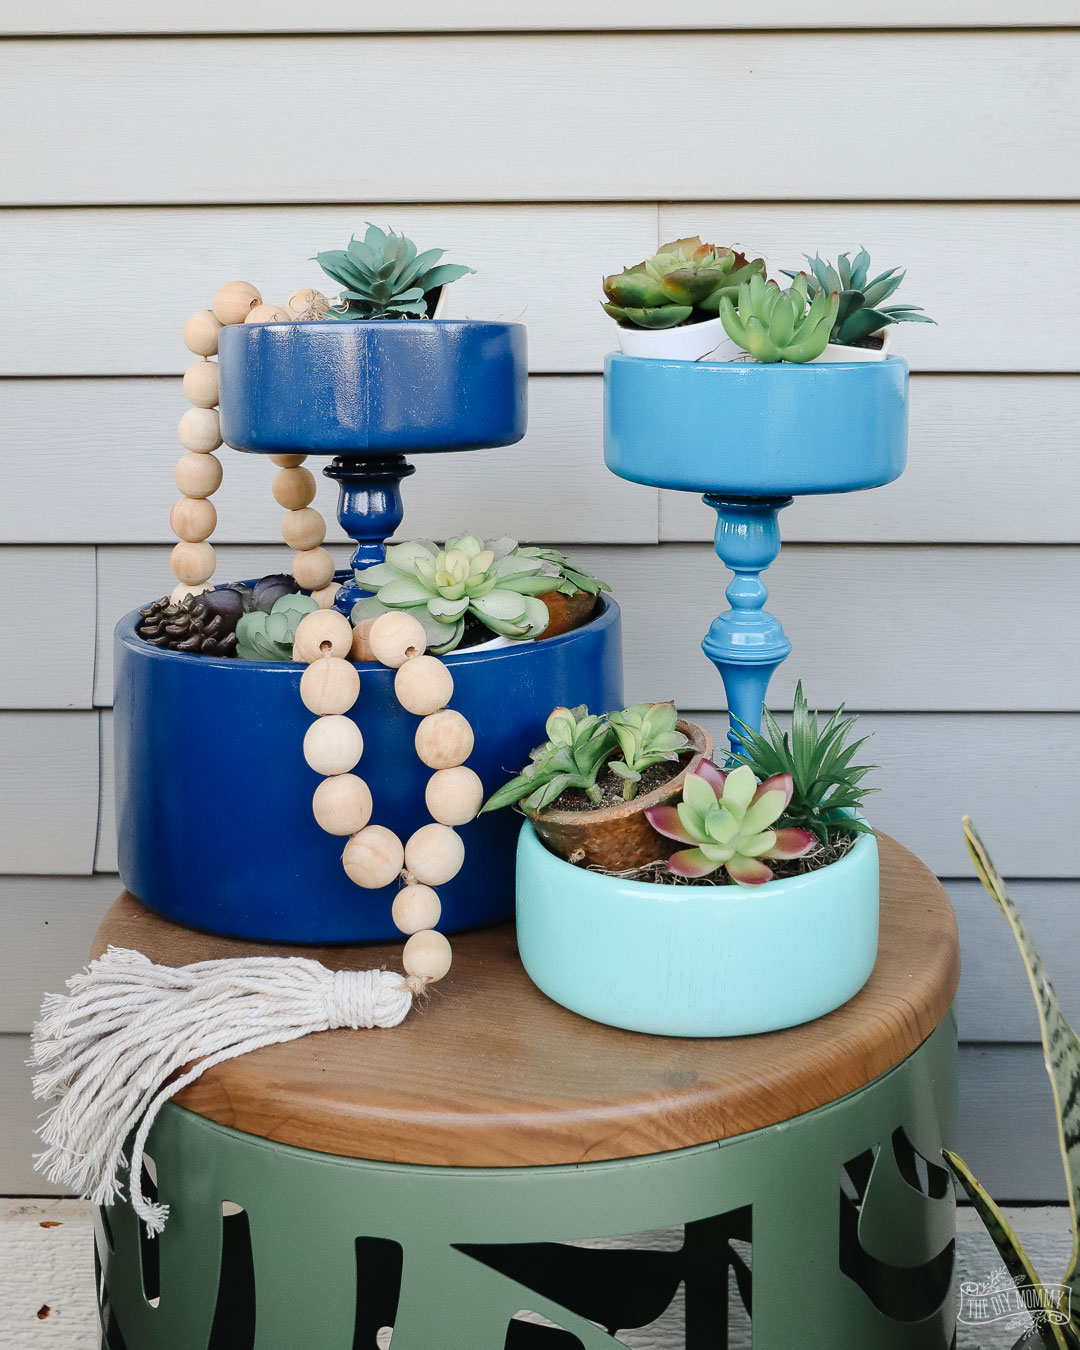 Learn how to make easy DIY tiered trays from thrifted wood bowls and candelsticks